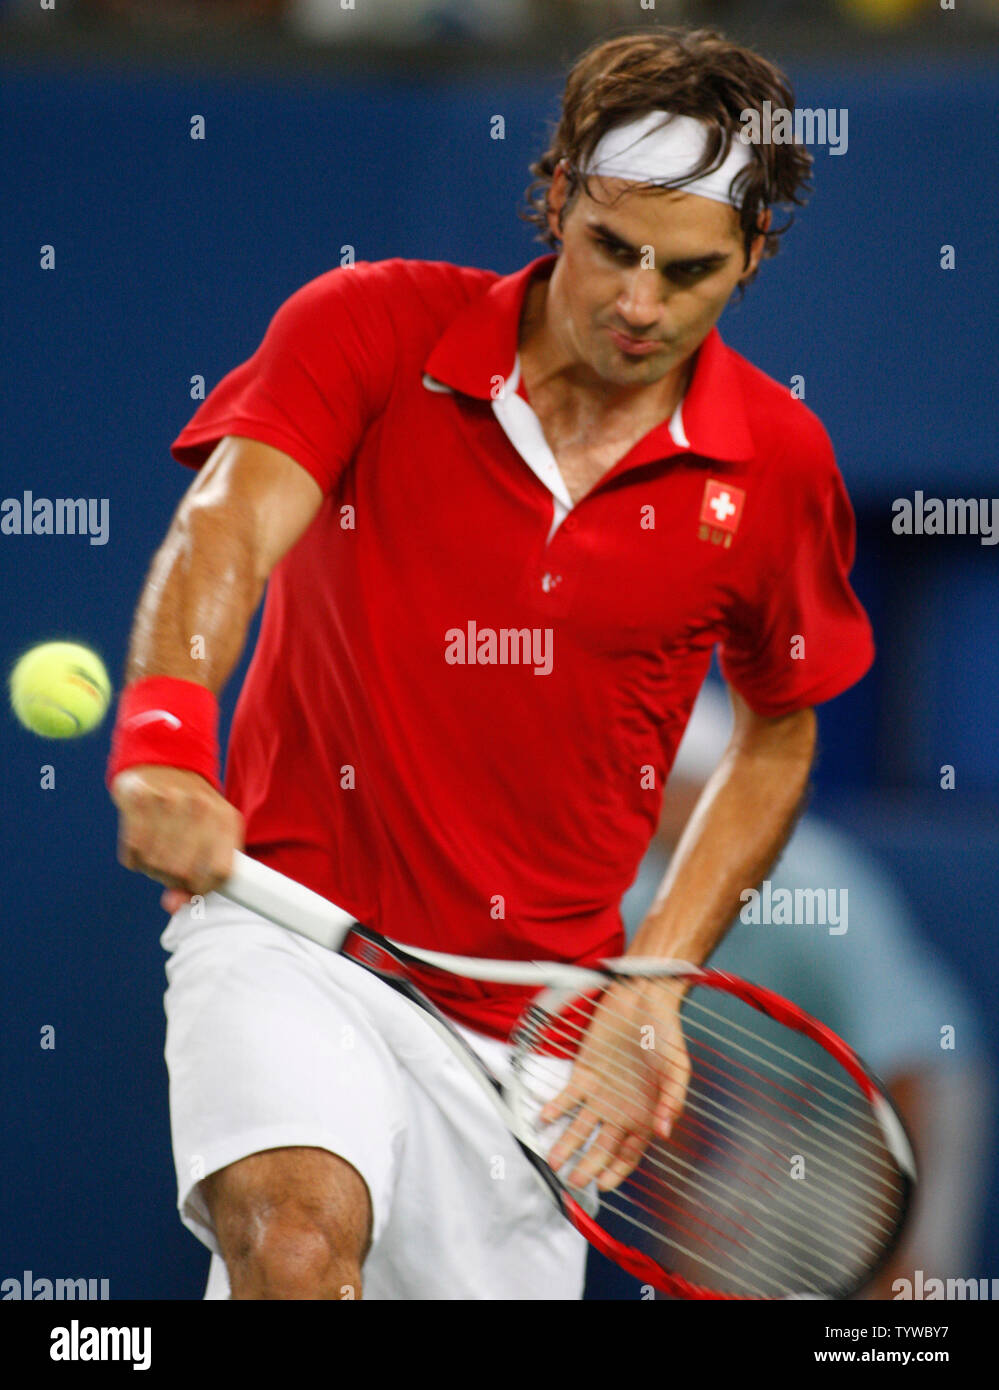 Roger Federer of Switzerland returns a volley to James Blake of the United  States in the quarterfinals of men's tennis at the 2008 Olympics in Beijing  on August 14, 2008. Blake upset